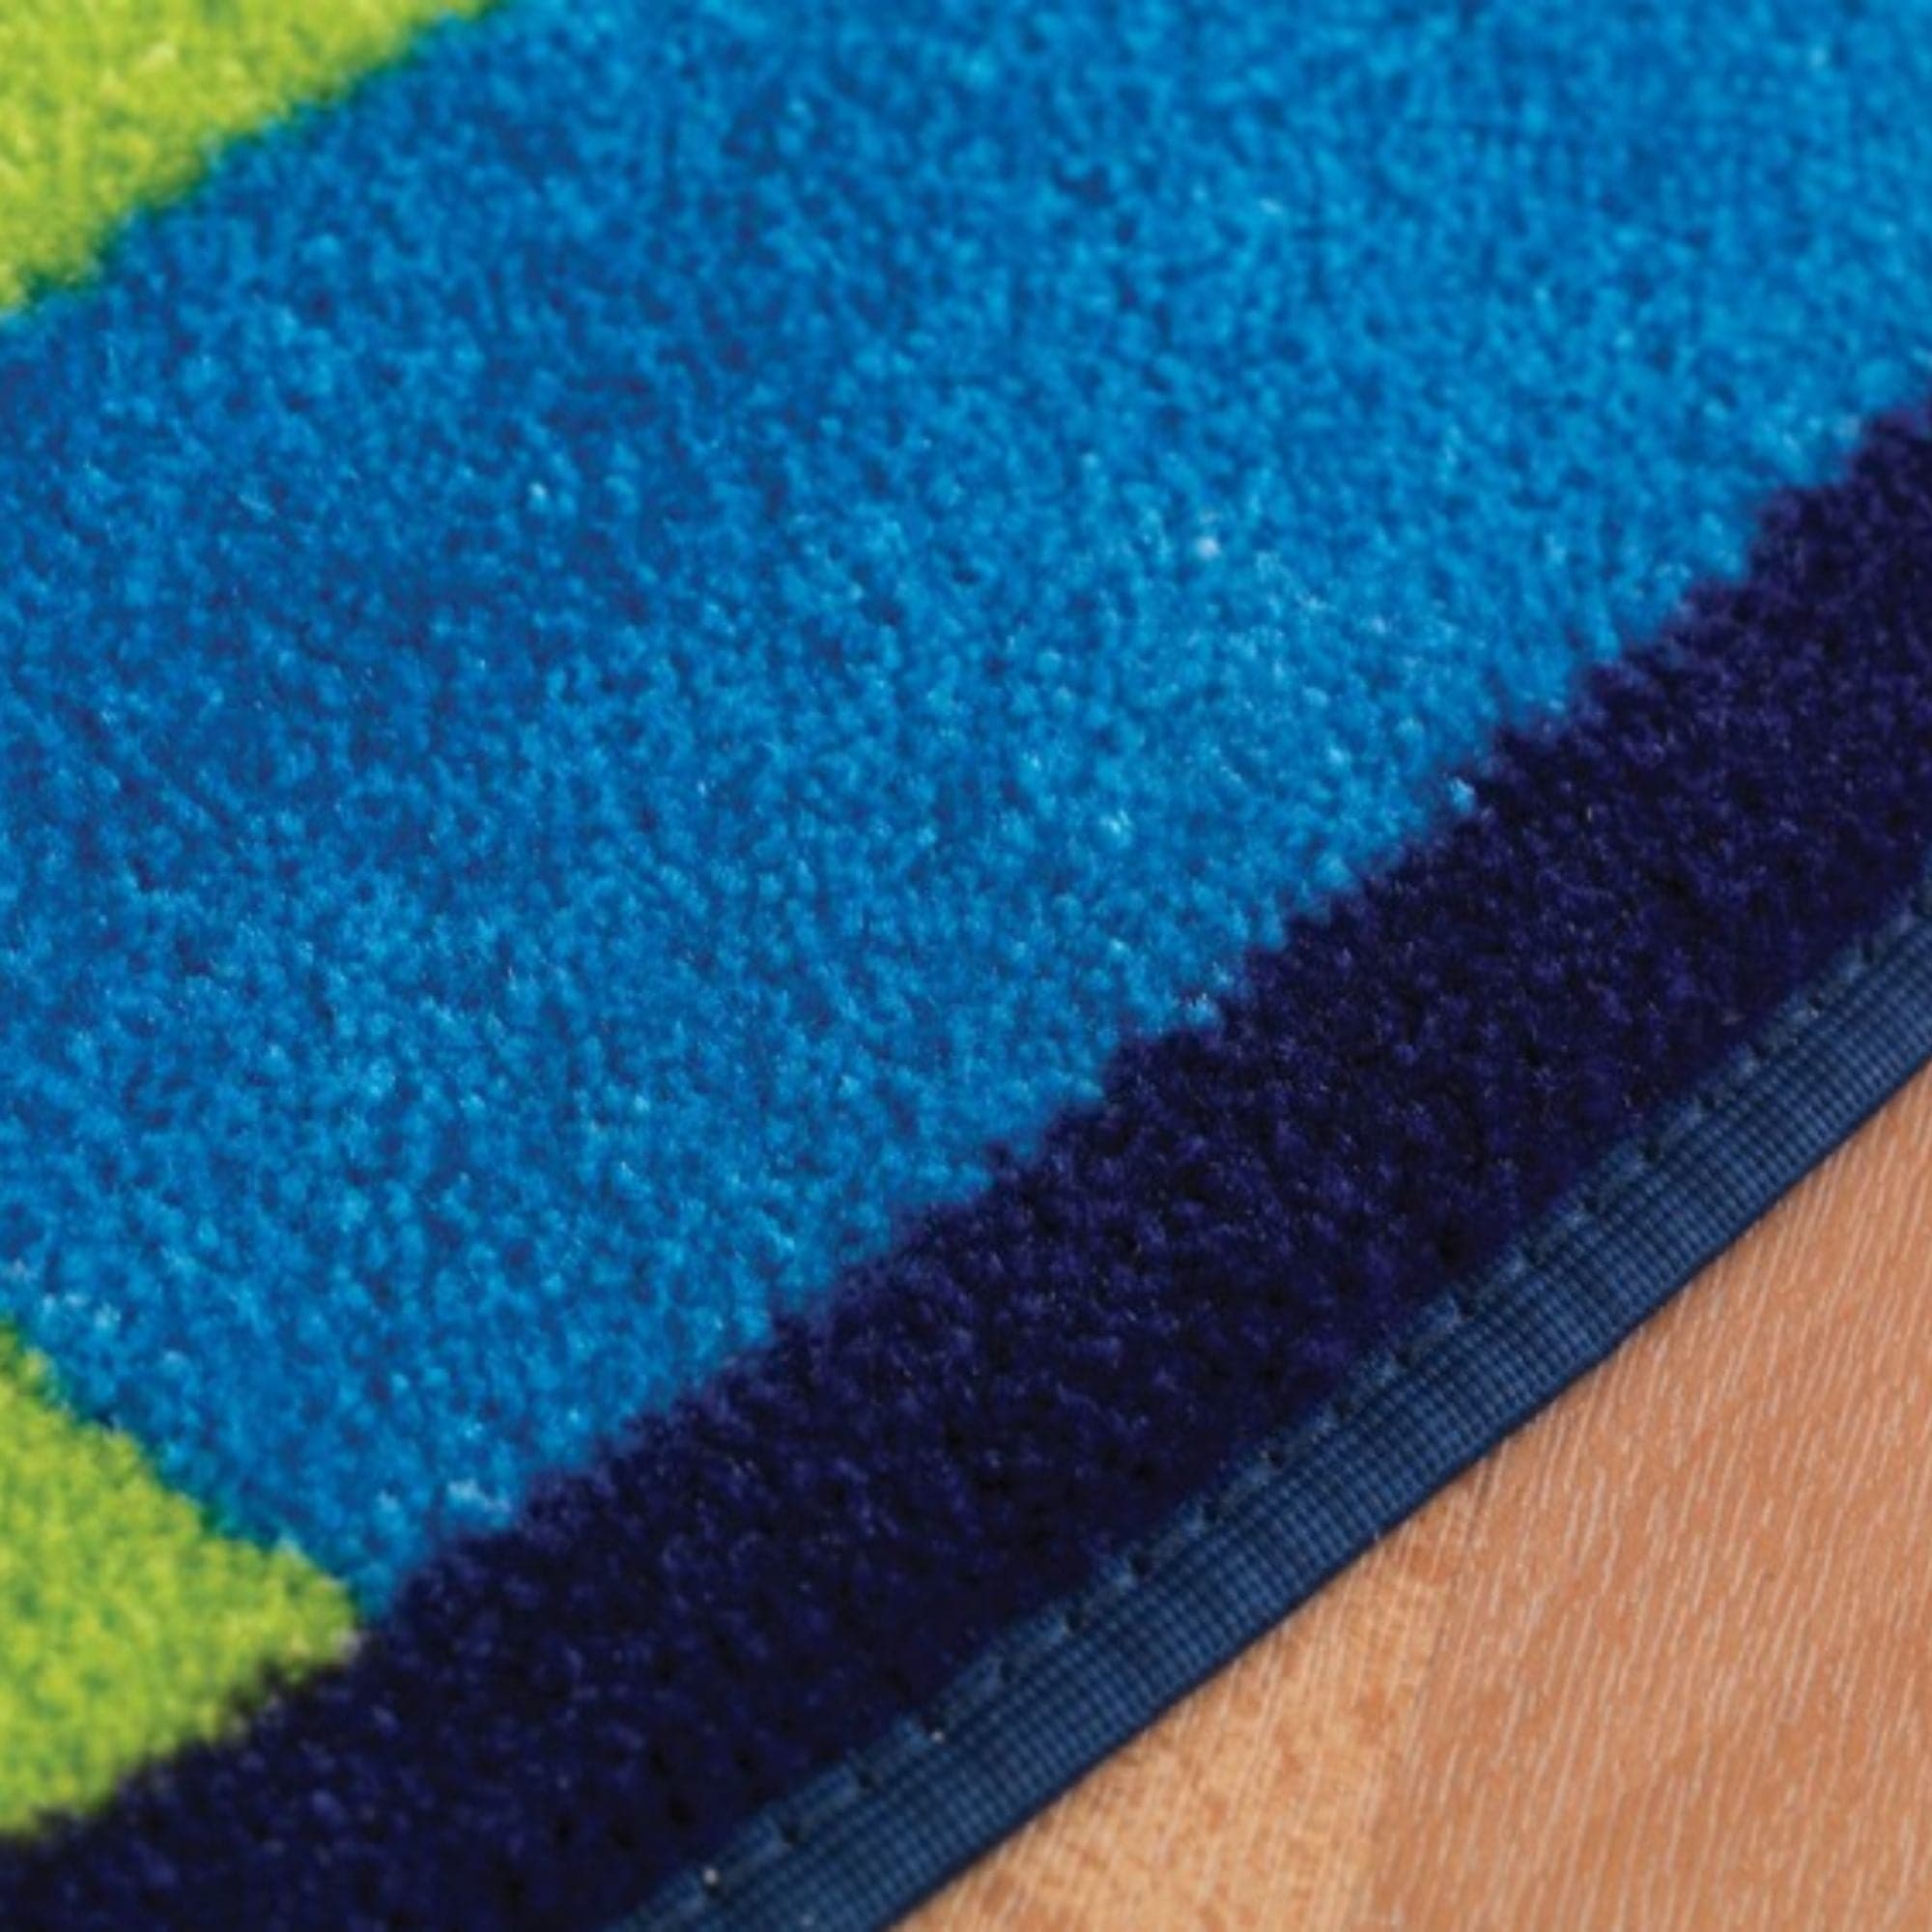 Rainbow Colour Palette Carpet, This vibrant Decorative Rainbow Colour Palette Carpet will brighten up any indoor classroom space. The Rainbow Colour Palette Carpet will develop children's knowledge of primary and secondary colours. The Rainbow Colour Palette Carpet is Ideal for rest and reading activities. Also a great and functional carpet to brighten up any classroom. The Rainbow Colour Palette Carpet is a functional carpet made with heavy duty tuf-pile, with anti slip backing to ensure safety on differen